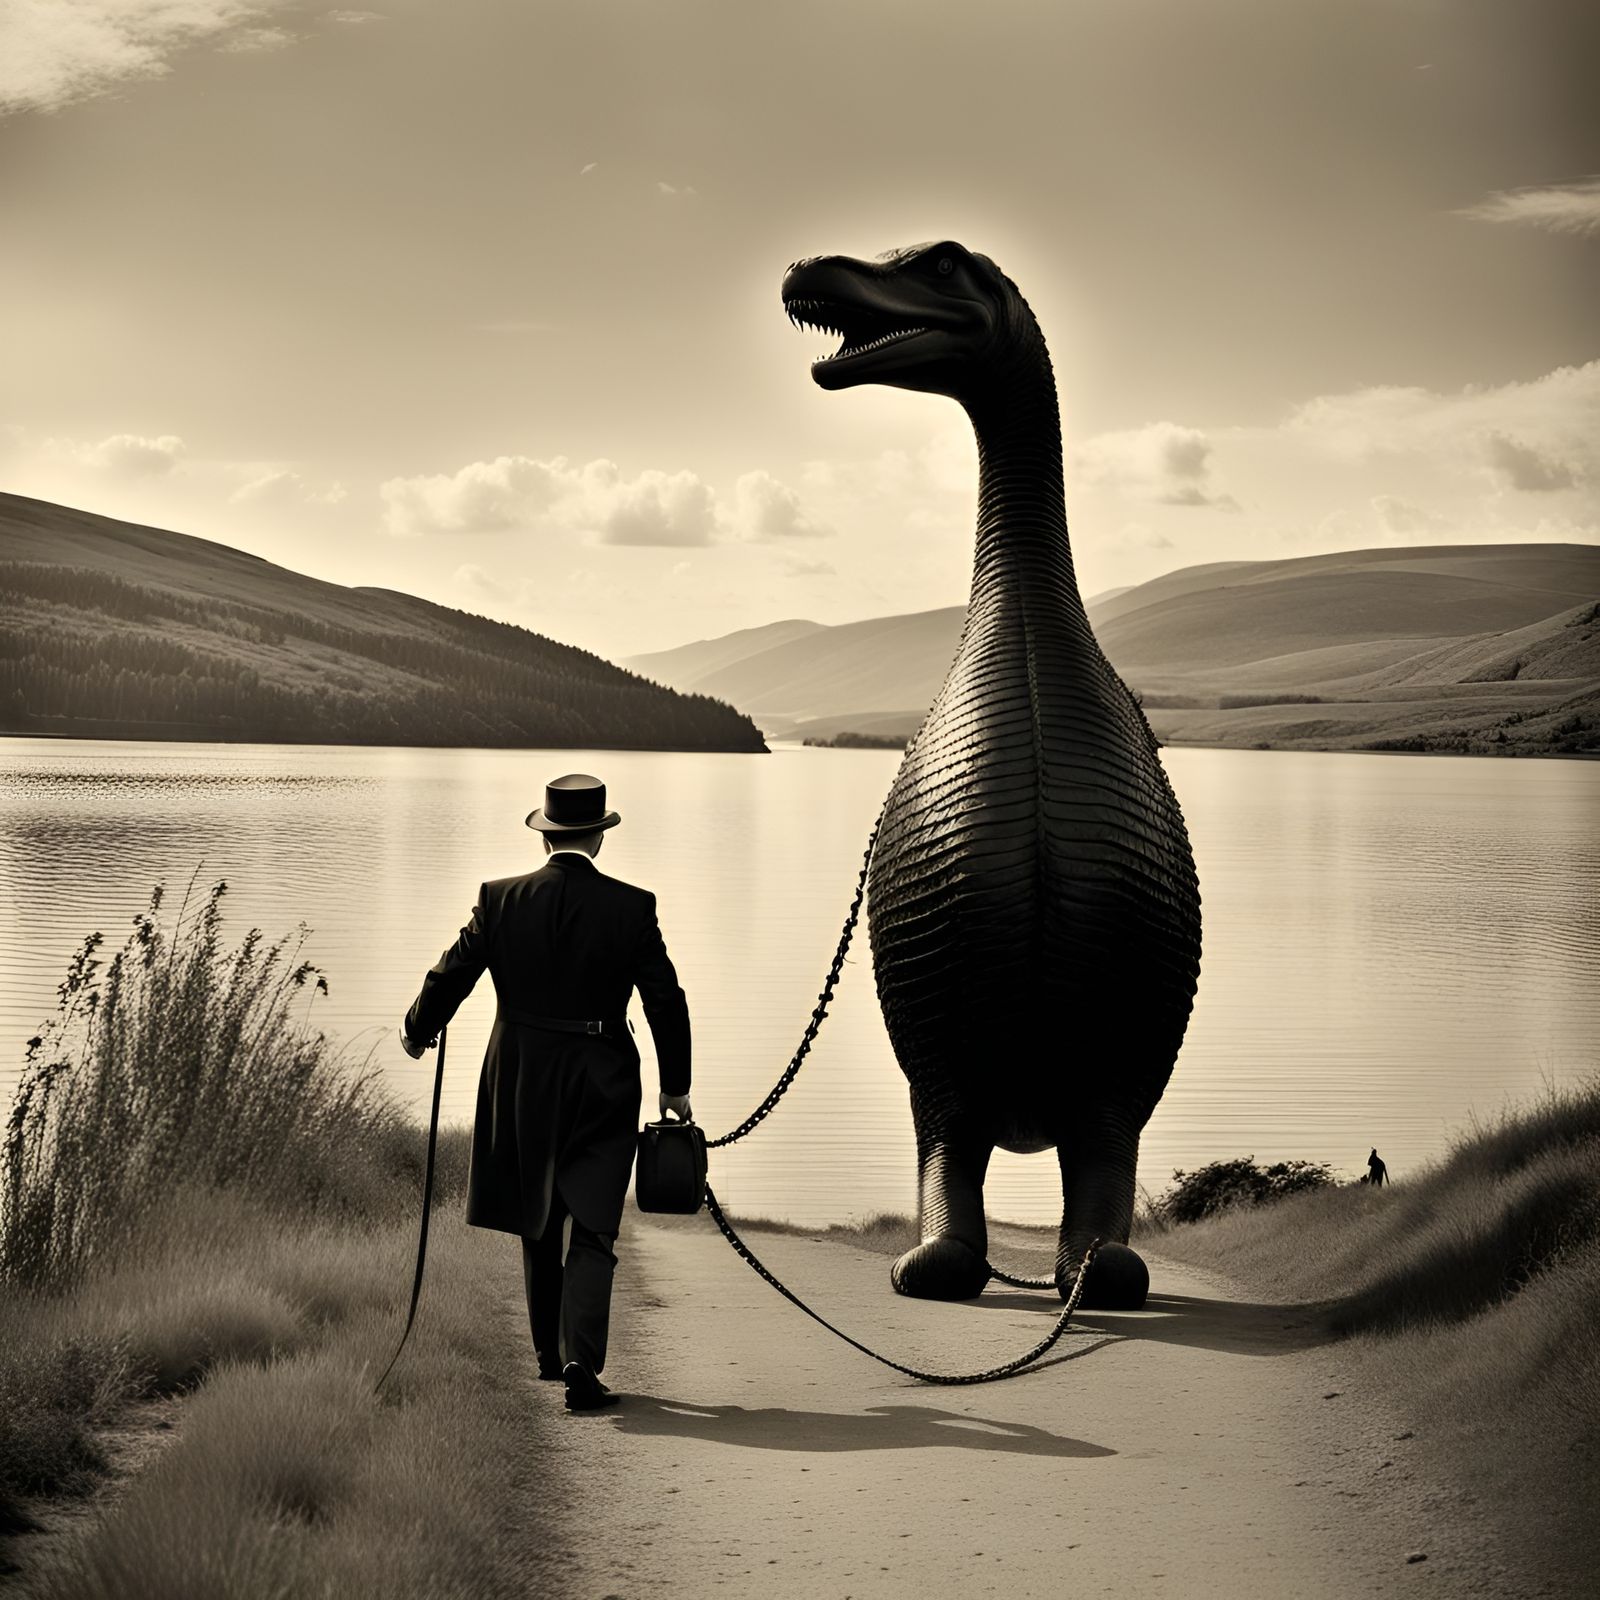 Just a man taking Nessie for a walk.